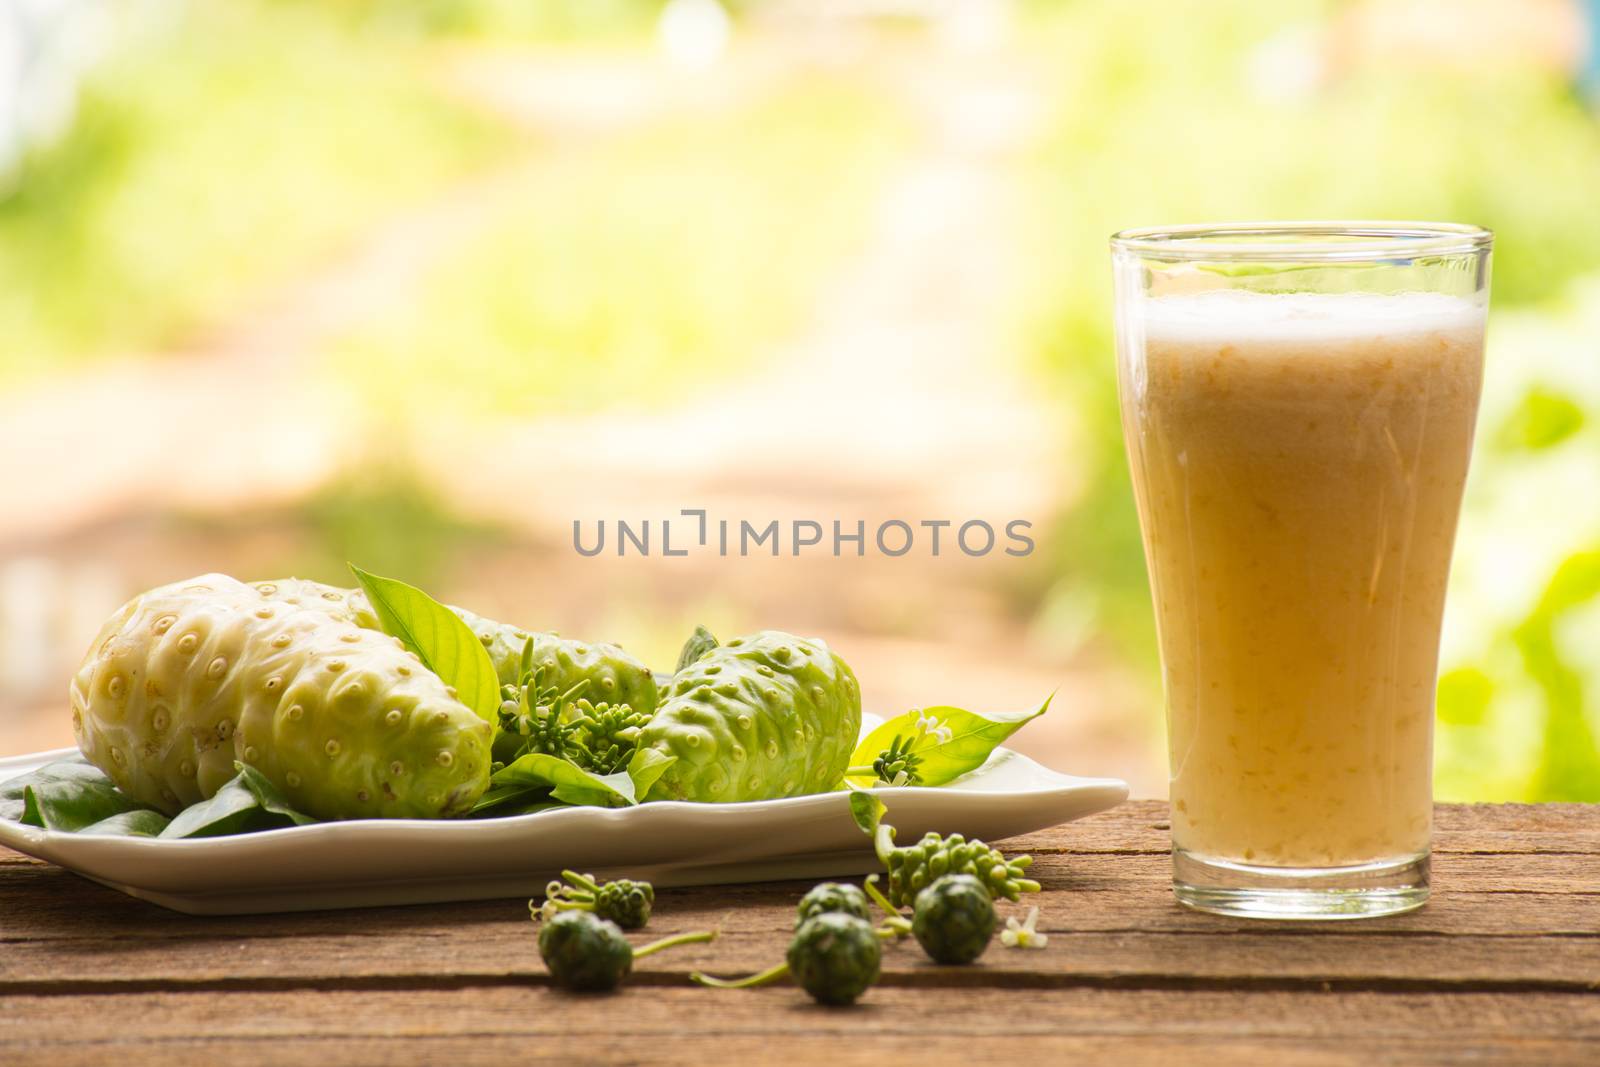 Noni and noni juice on wooden background.Juice for health or fruit for health or herb for health.Outdoor view11